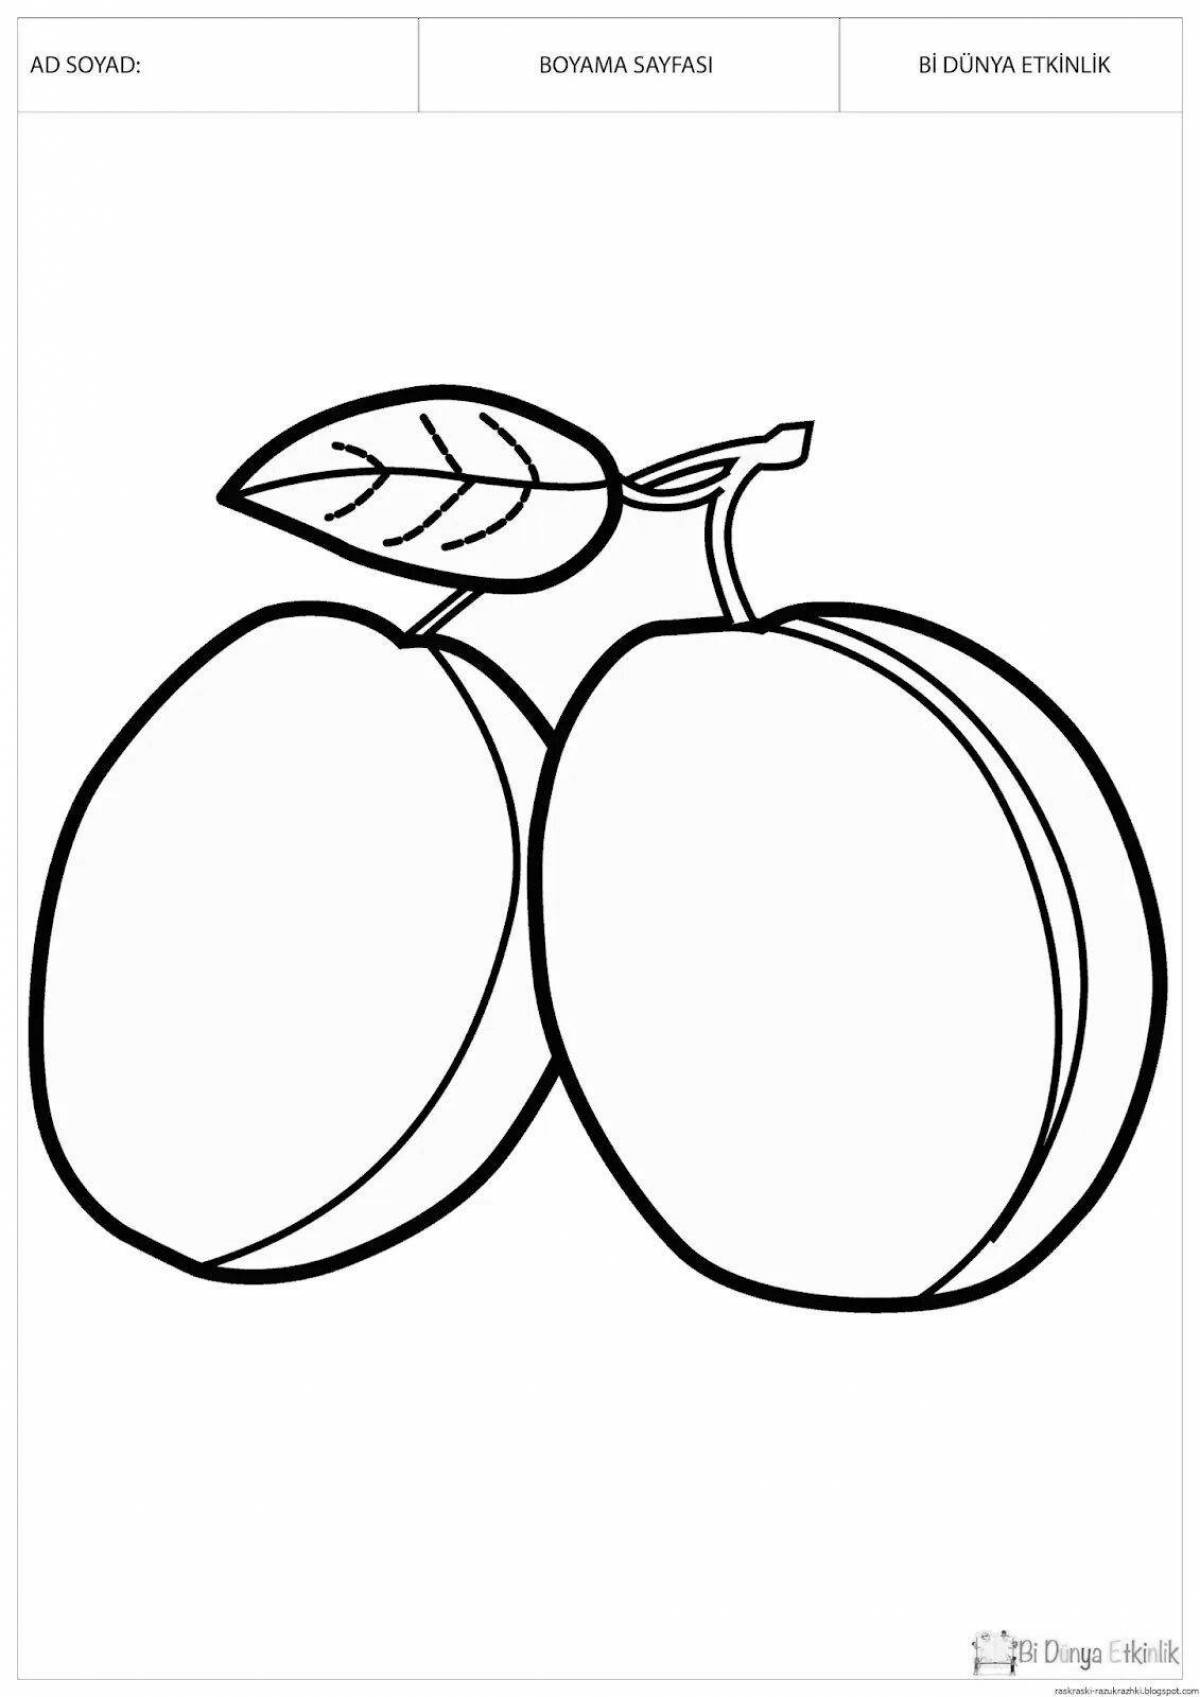 Adorable berries and fruits coloring book for kids